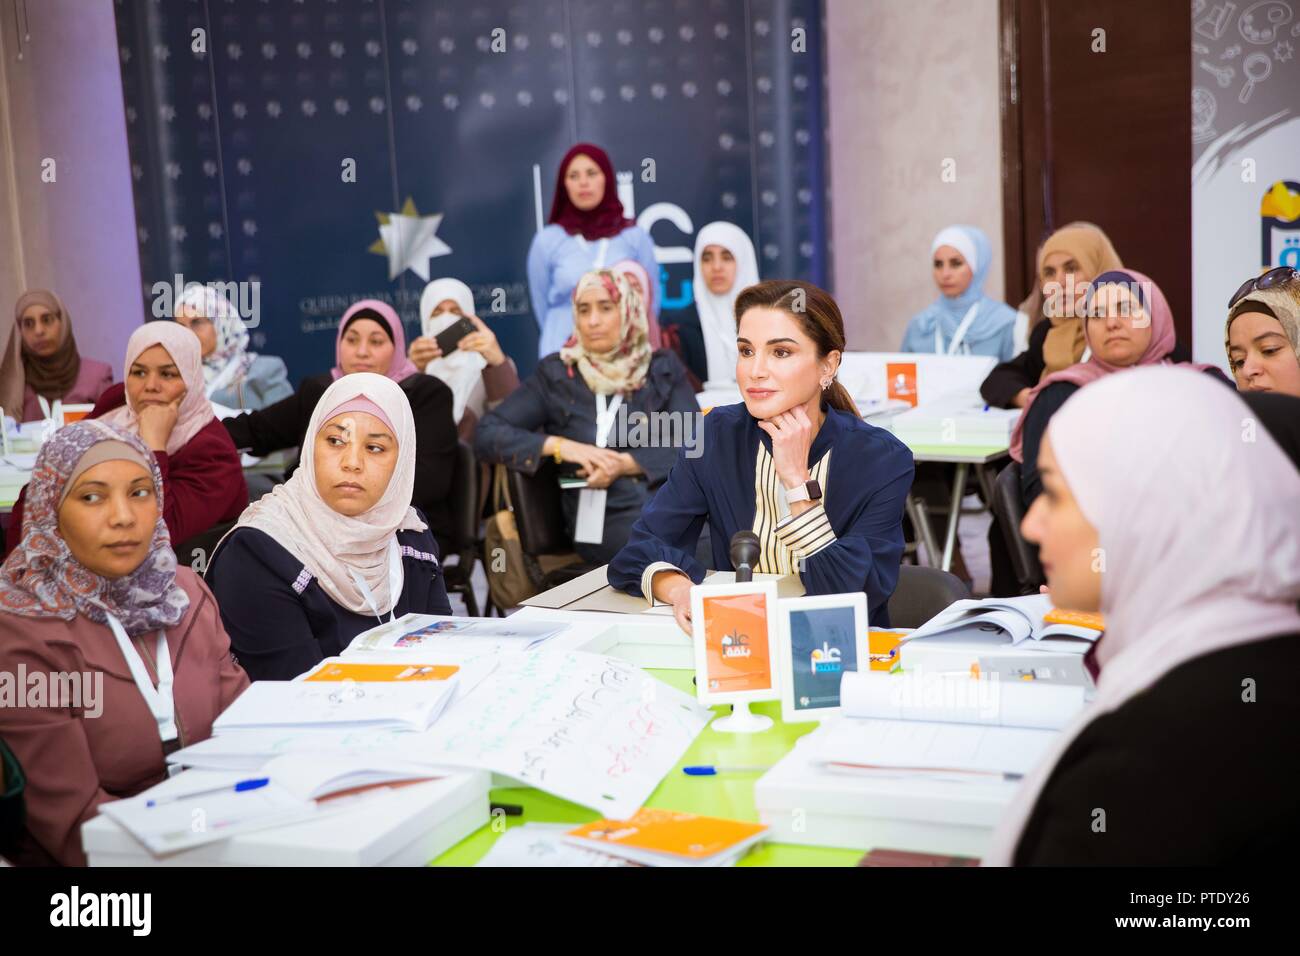 Queen Rania of Jordan at the Queen Rania Teacher Academy in Al Karak, on October 08, 2018, to meet teachers who are taking part in the Teach Like a Champion 2.0 program Photo: Albert Ph vd Werf/ Netherlands OUT/Point de Vue OUT | Stock Photo